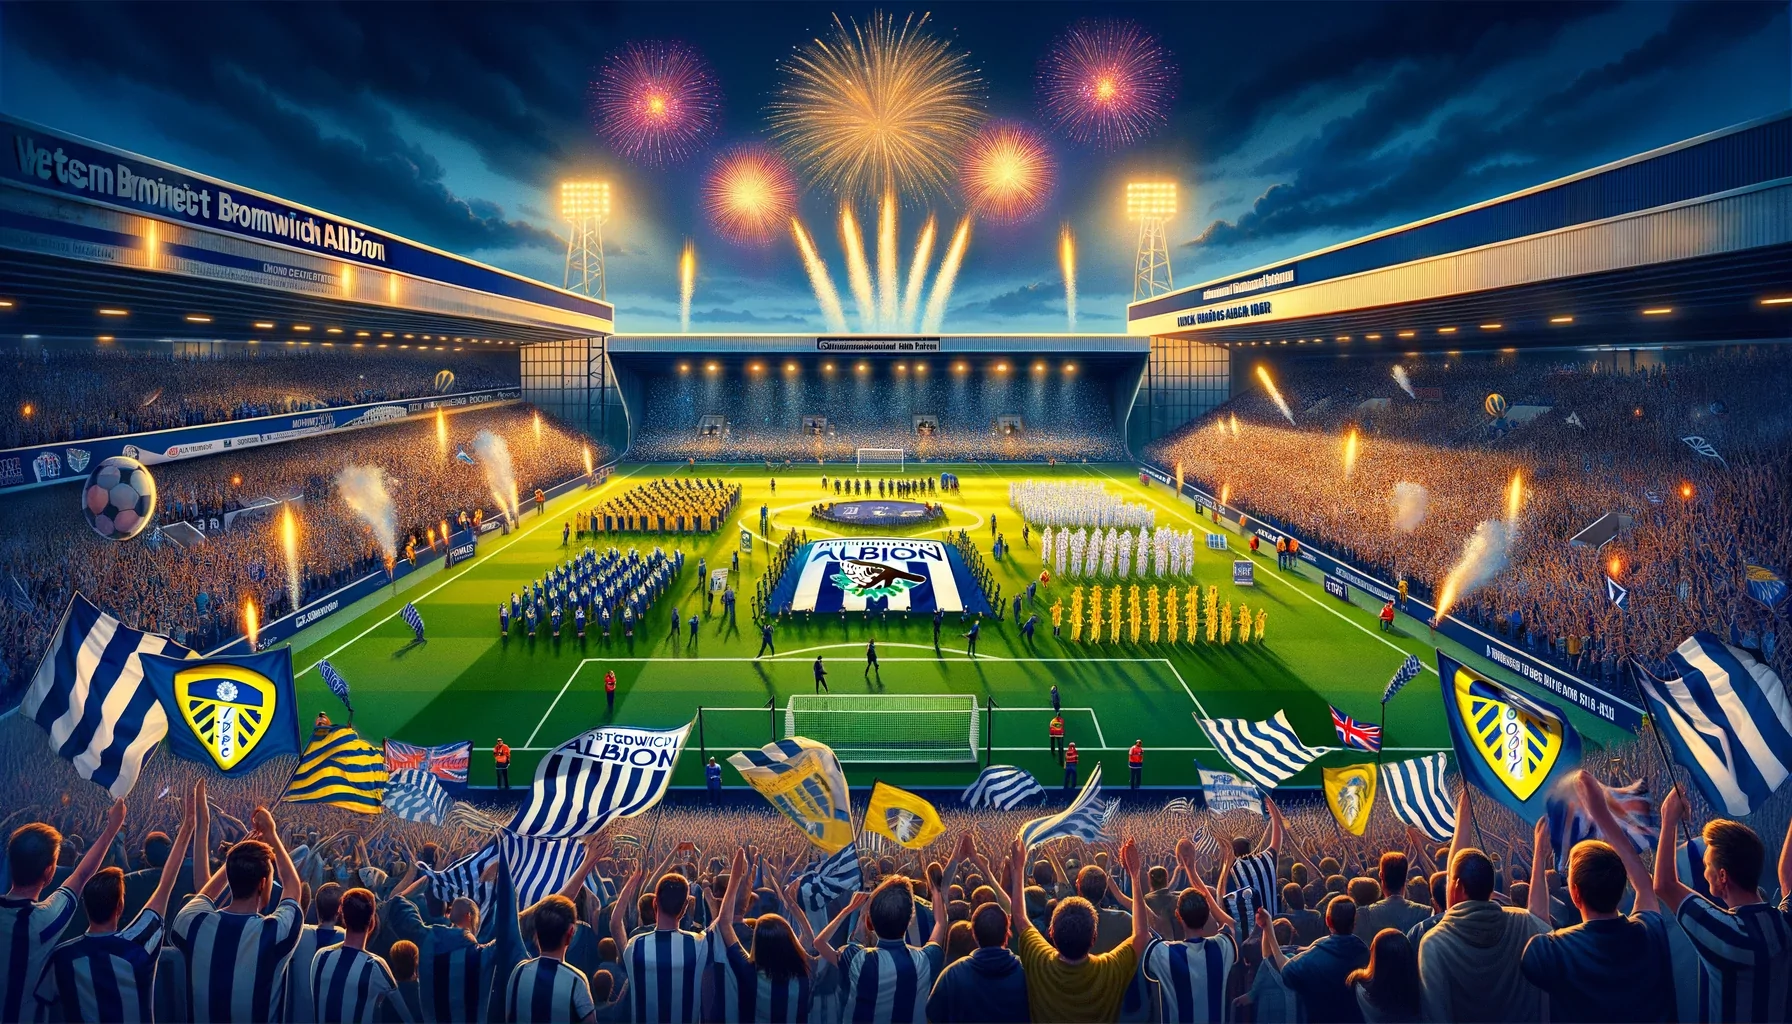 A festive scene celebrating a championship football match between West Bromwich Albion and Leeds United at The Hawthorns stadium. The image includes a